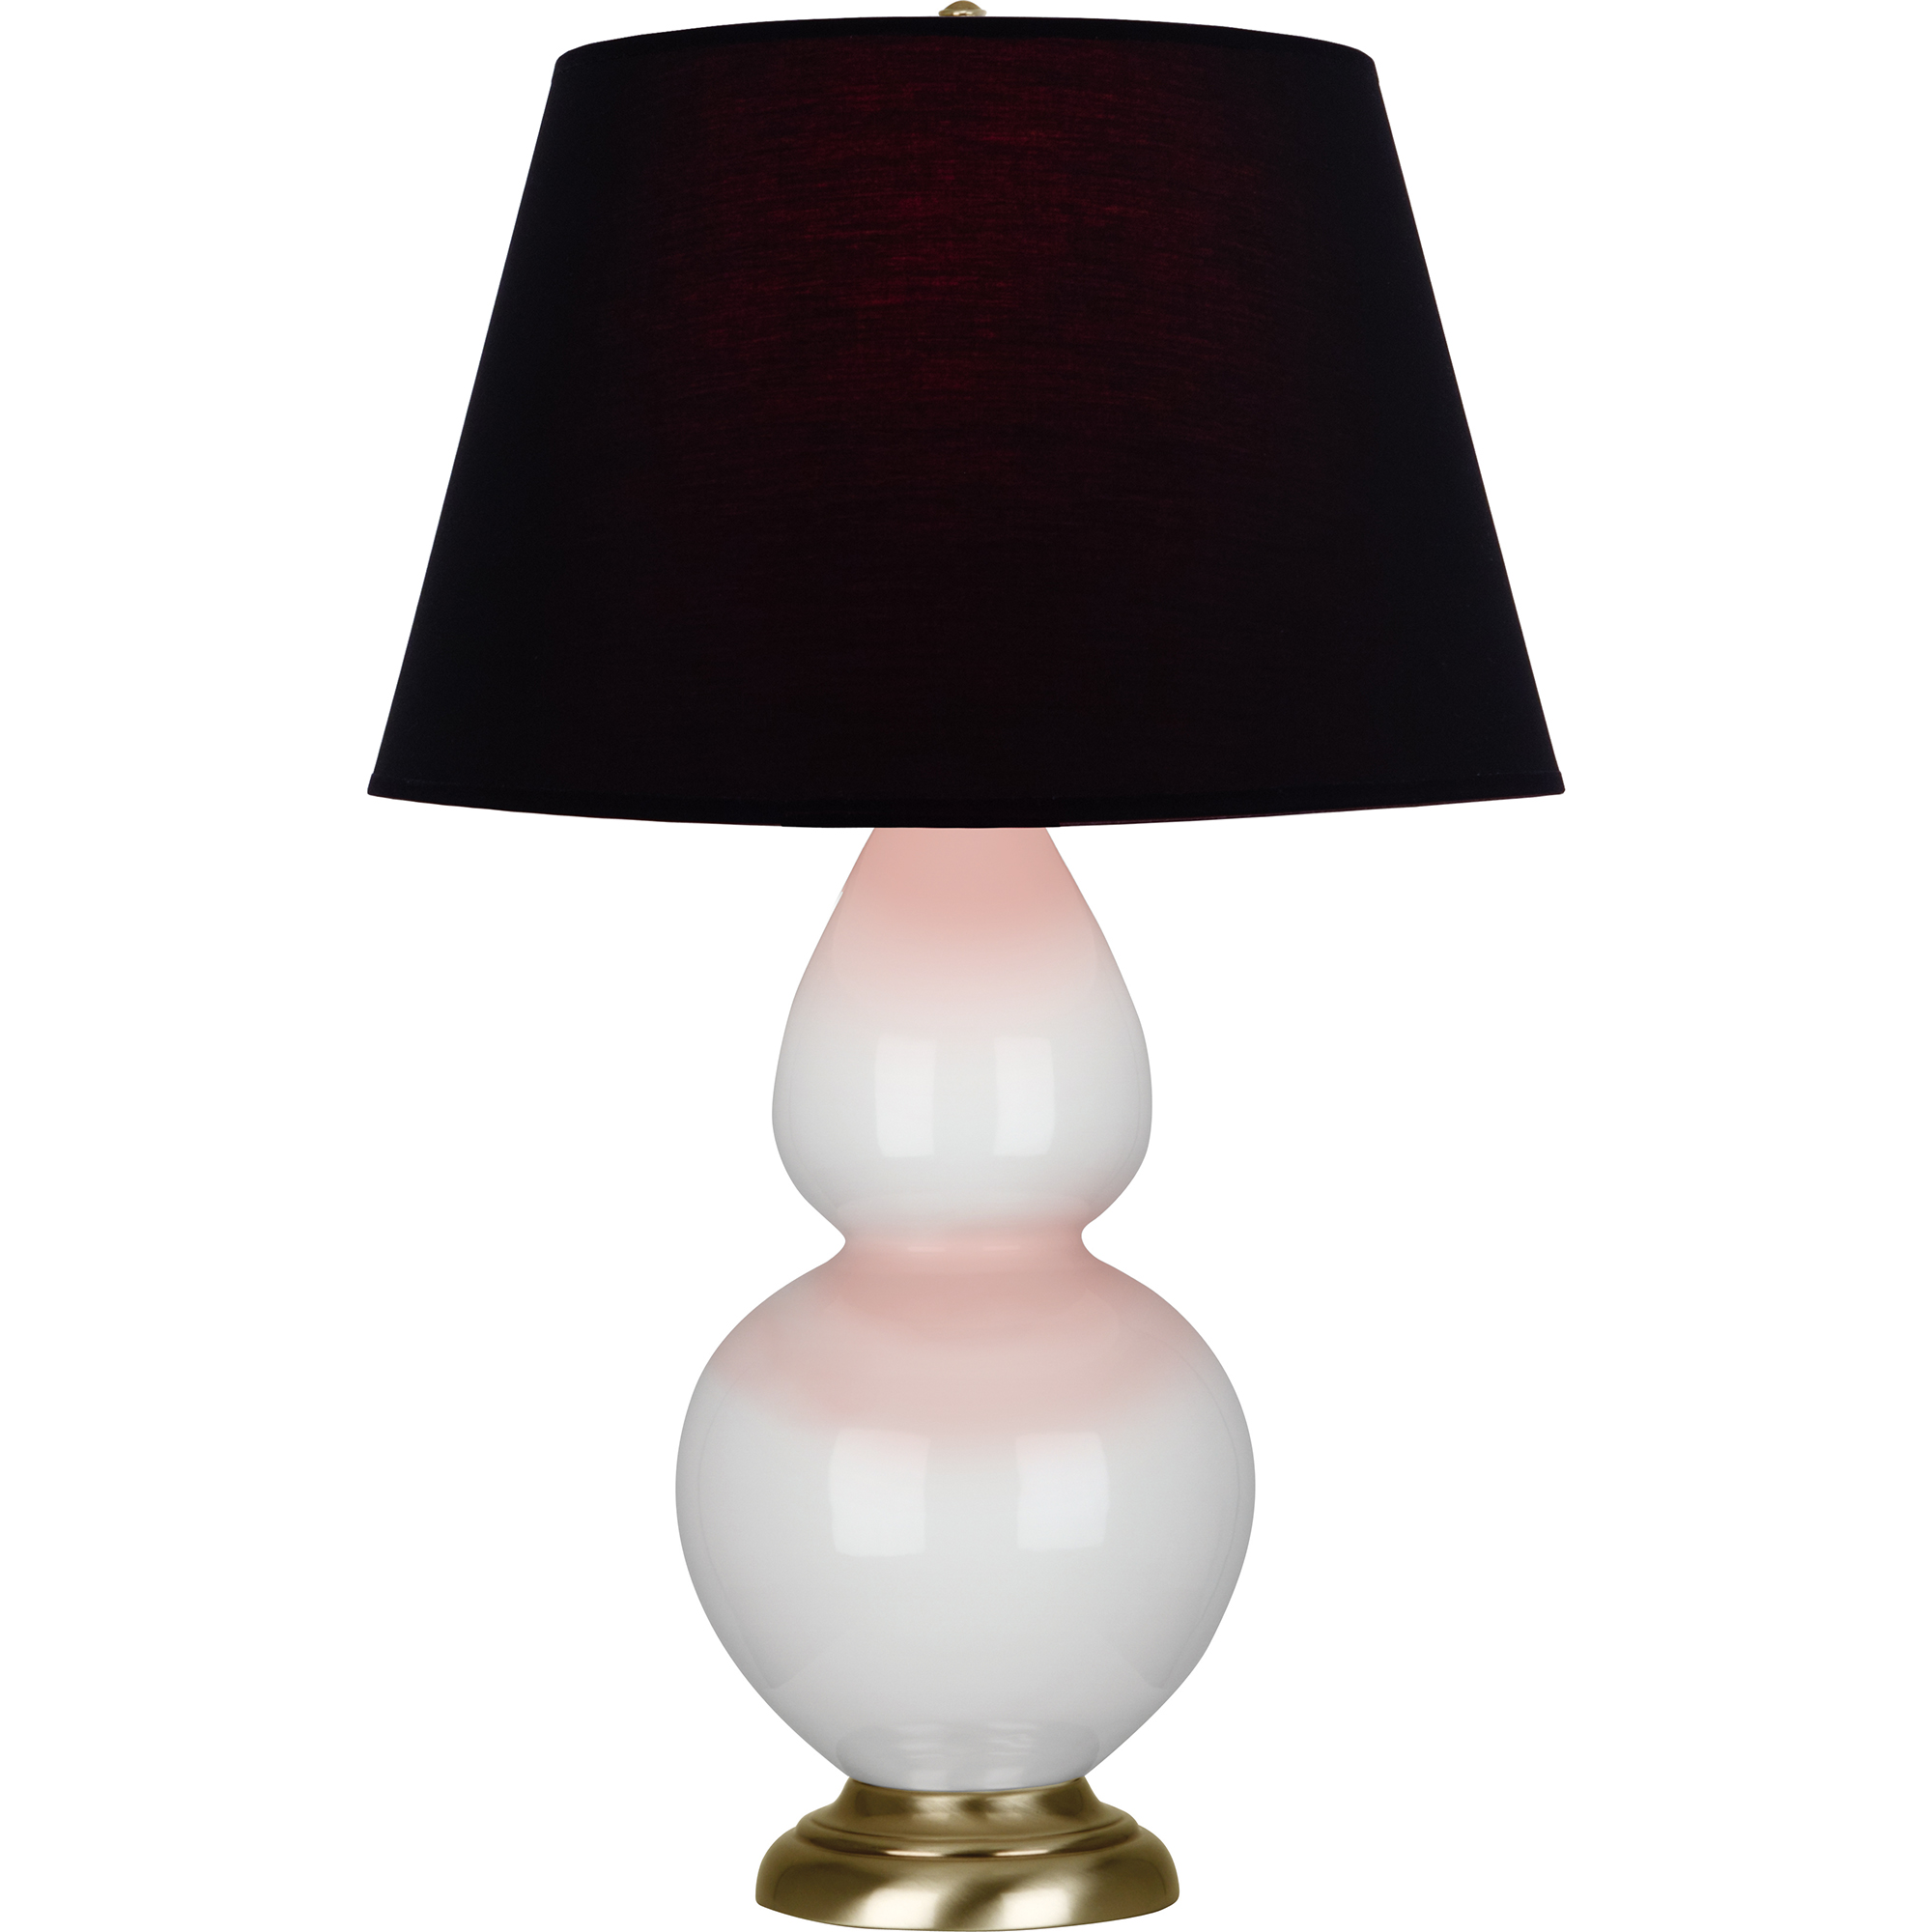 Double Gourd Table Lamp Style #1660K